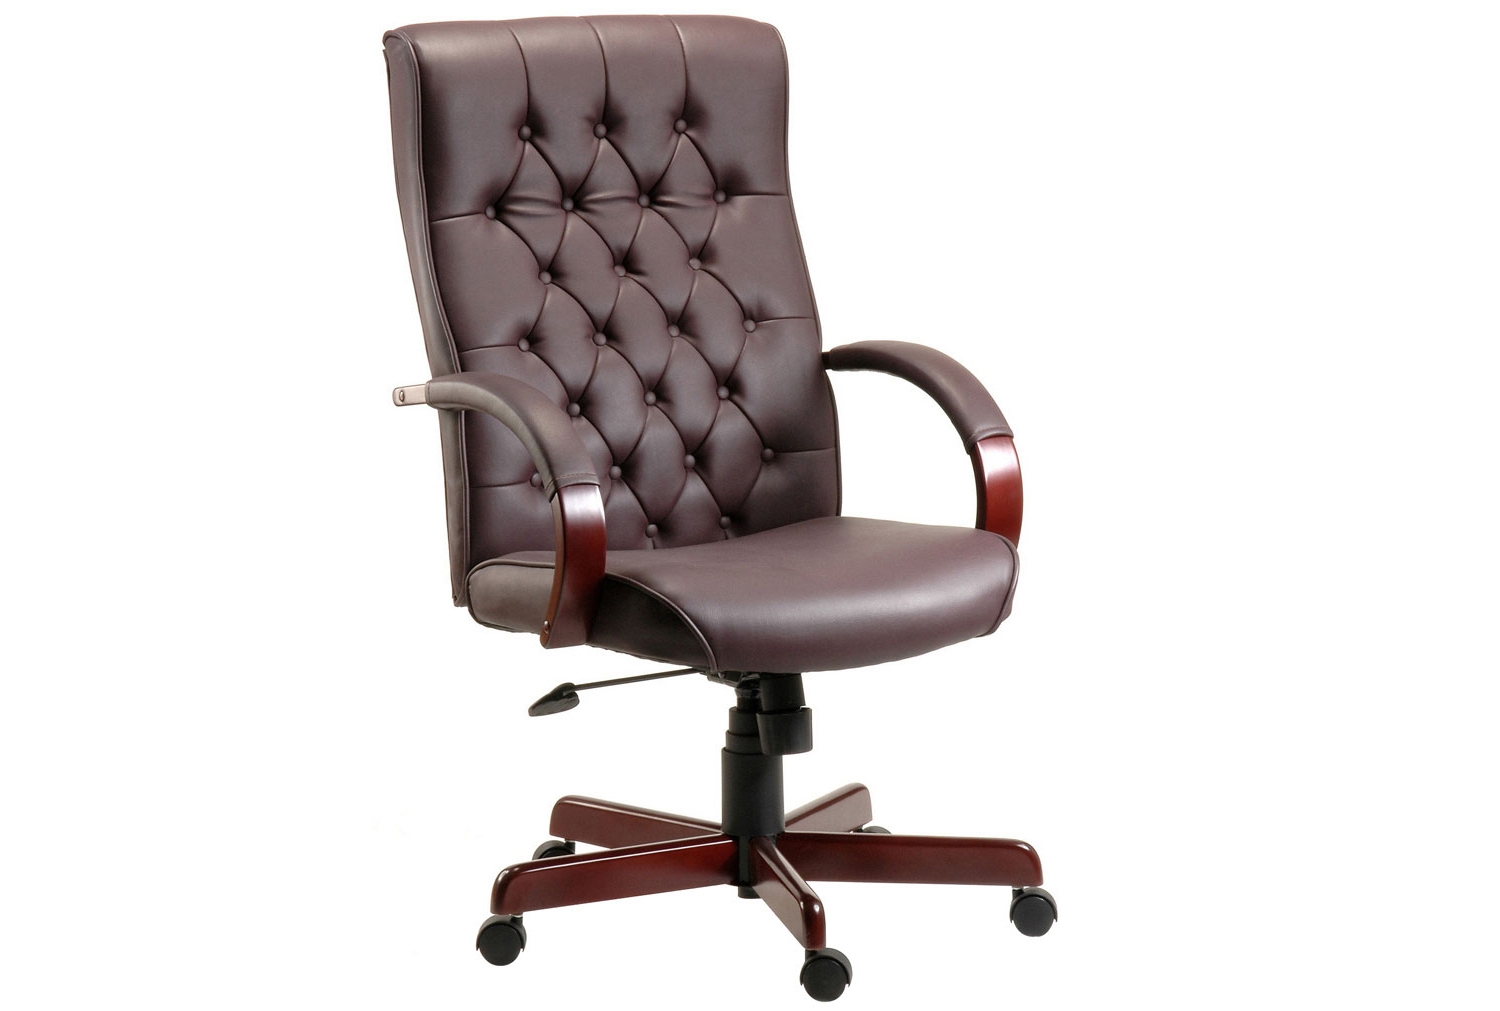 Warwick Leather Faced Executive Office Chair (Burgundy), Fully Installed